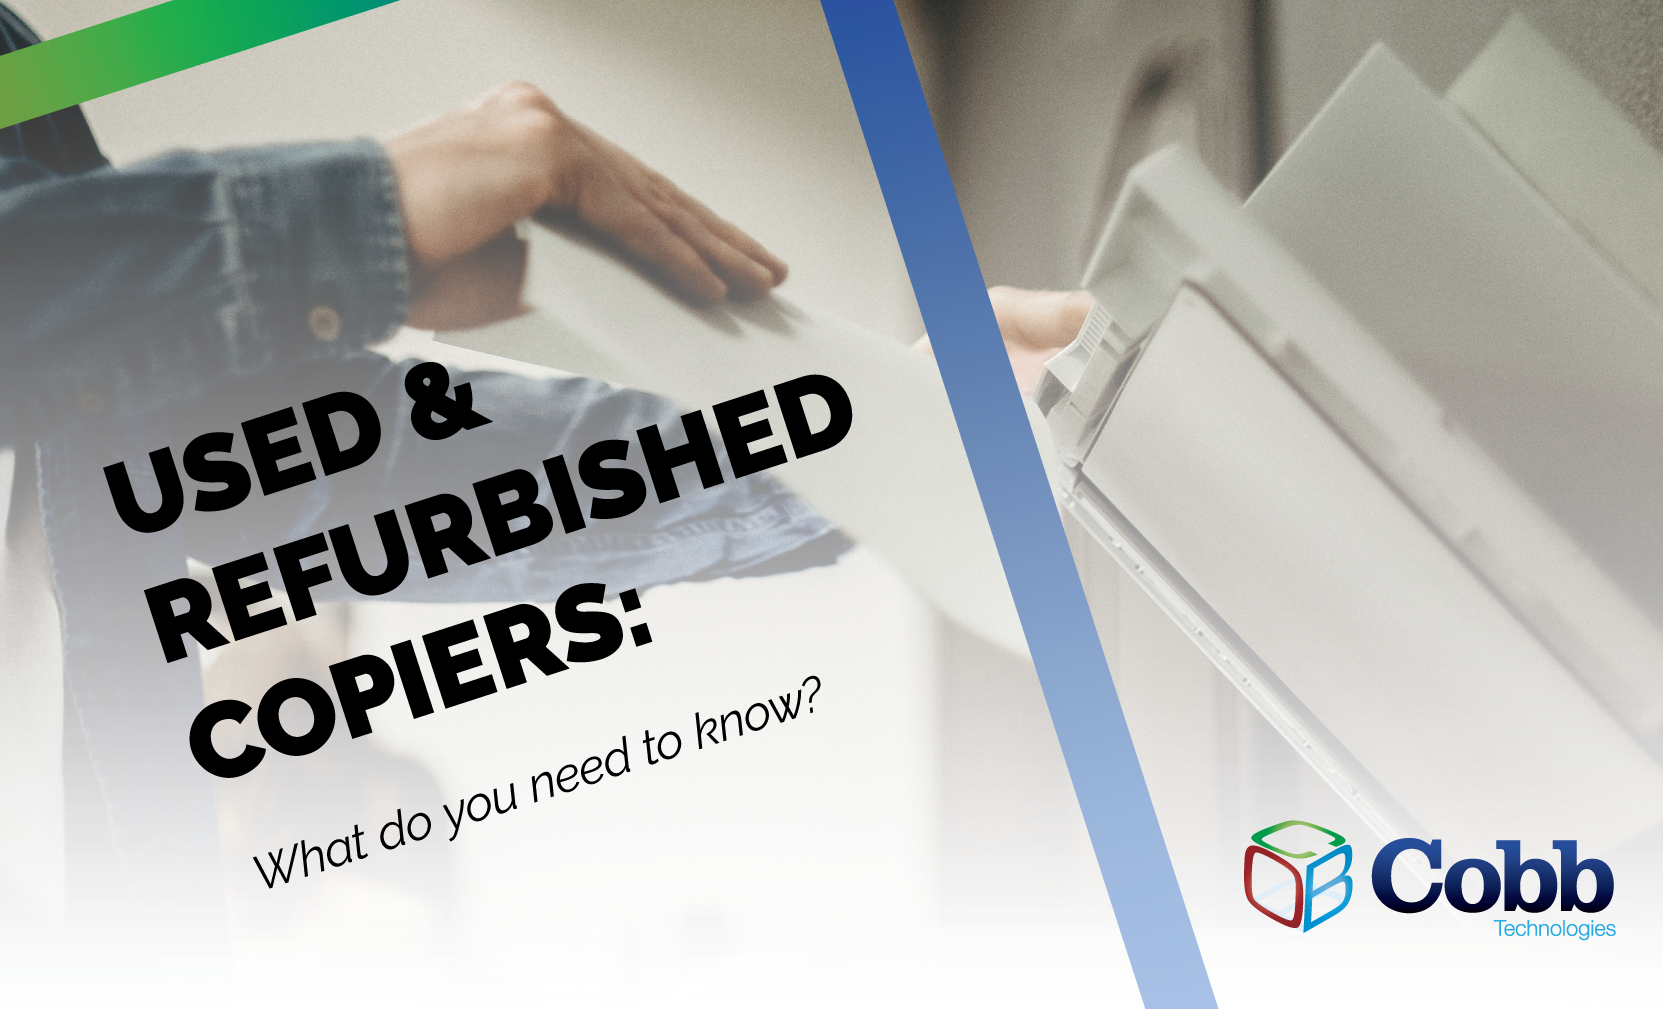 Purchasing and Leasing Refurbished & Used Copiers: What Do I Need to Know?